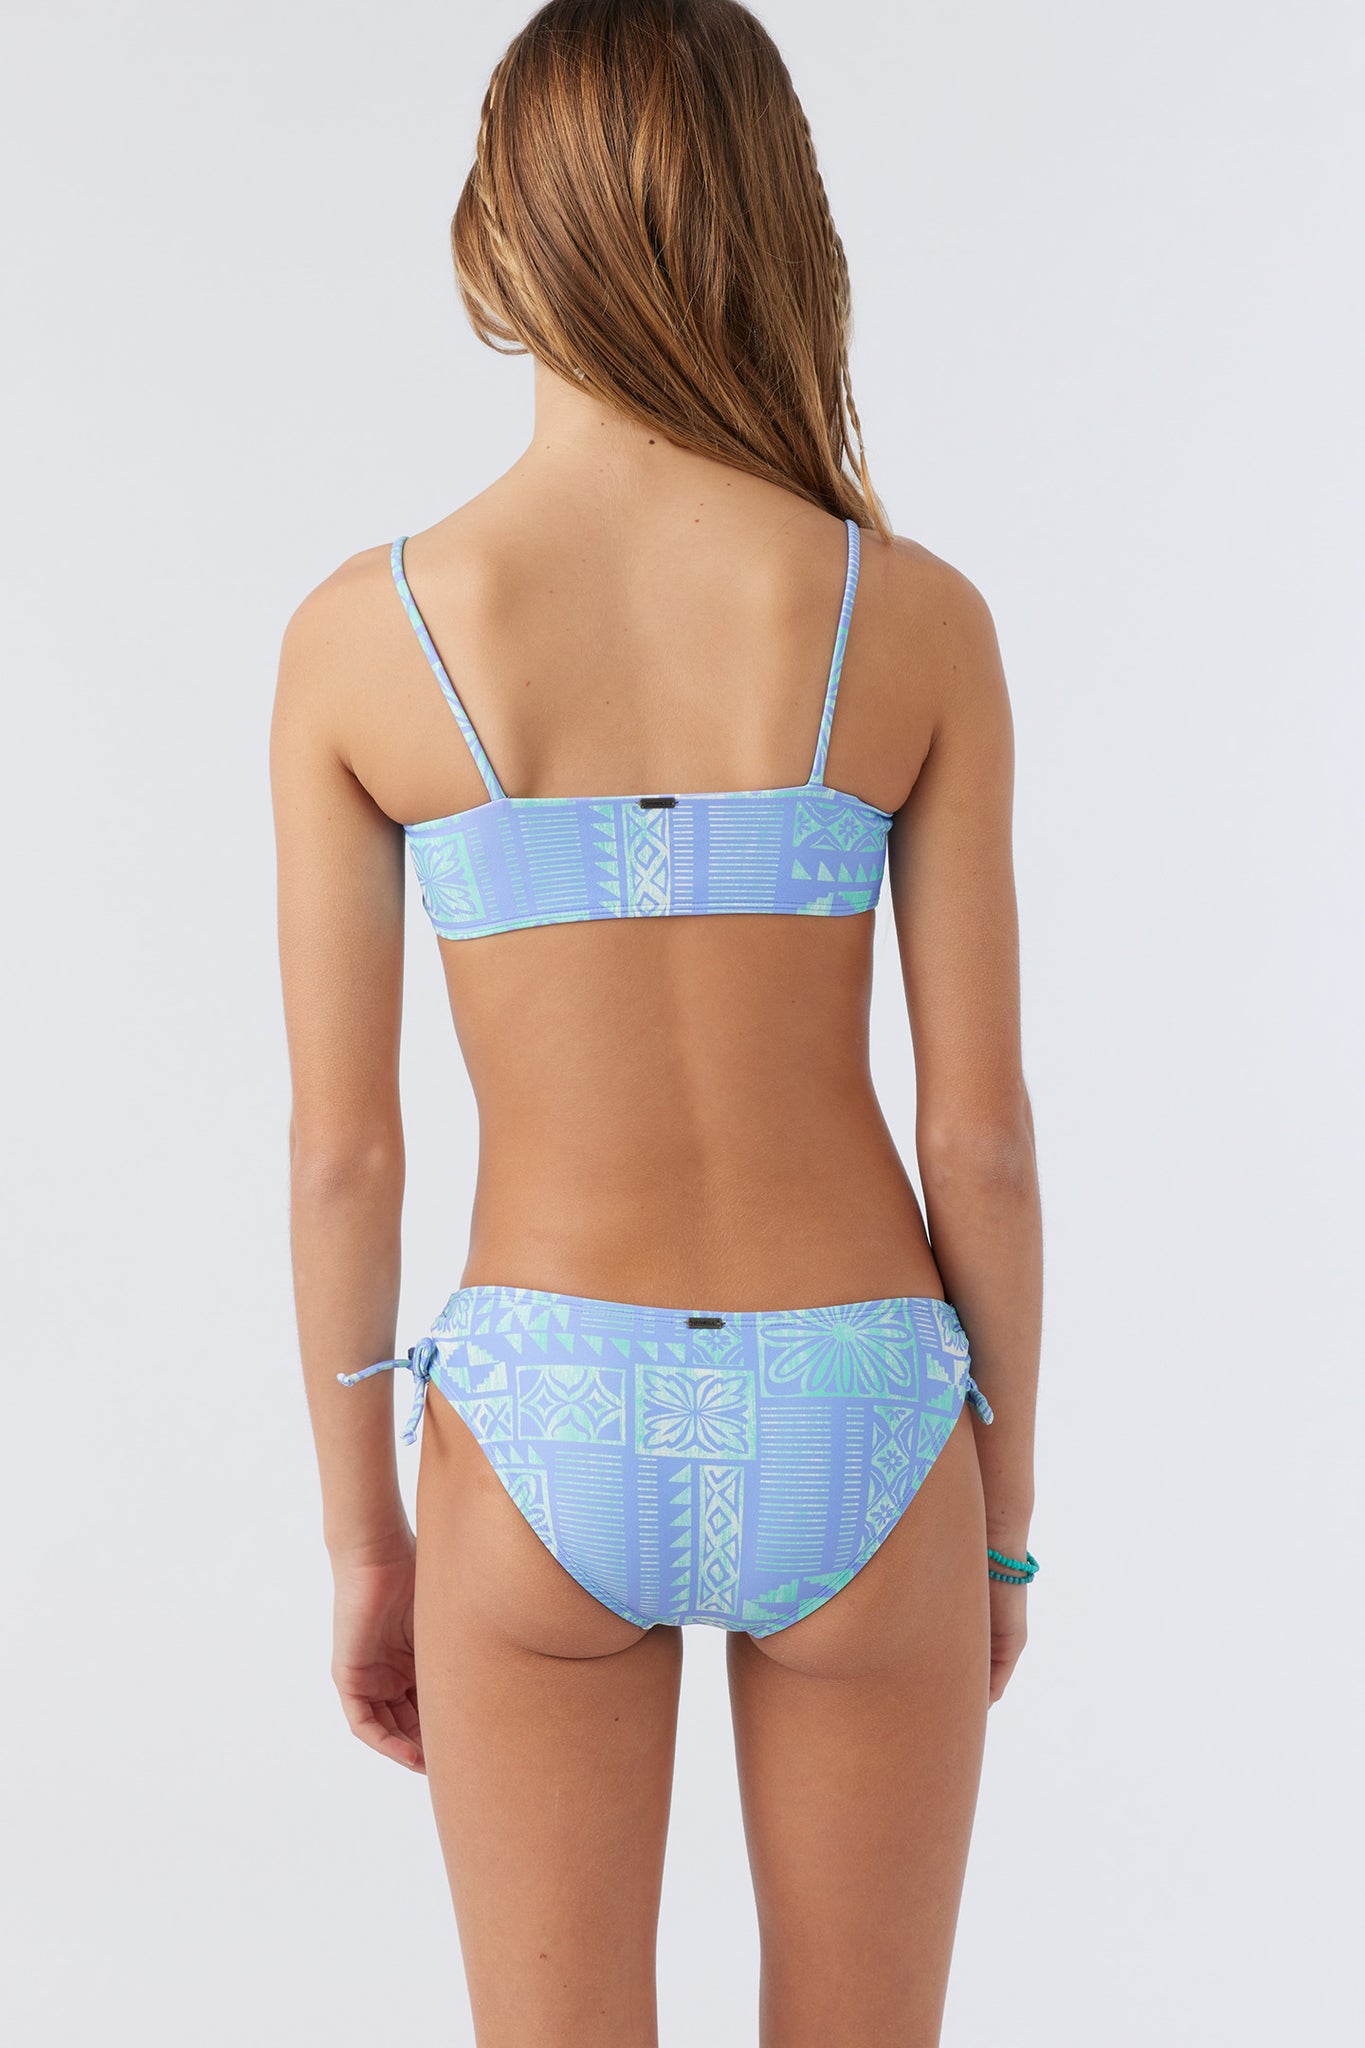 Tween and teen swimwear for girls and teens and tweens – Tagged